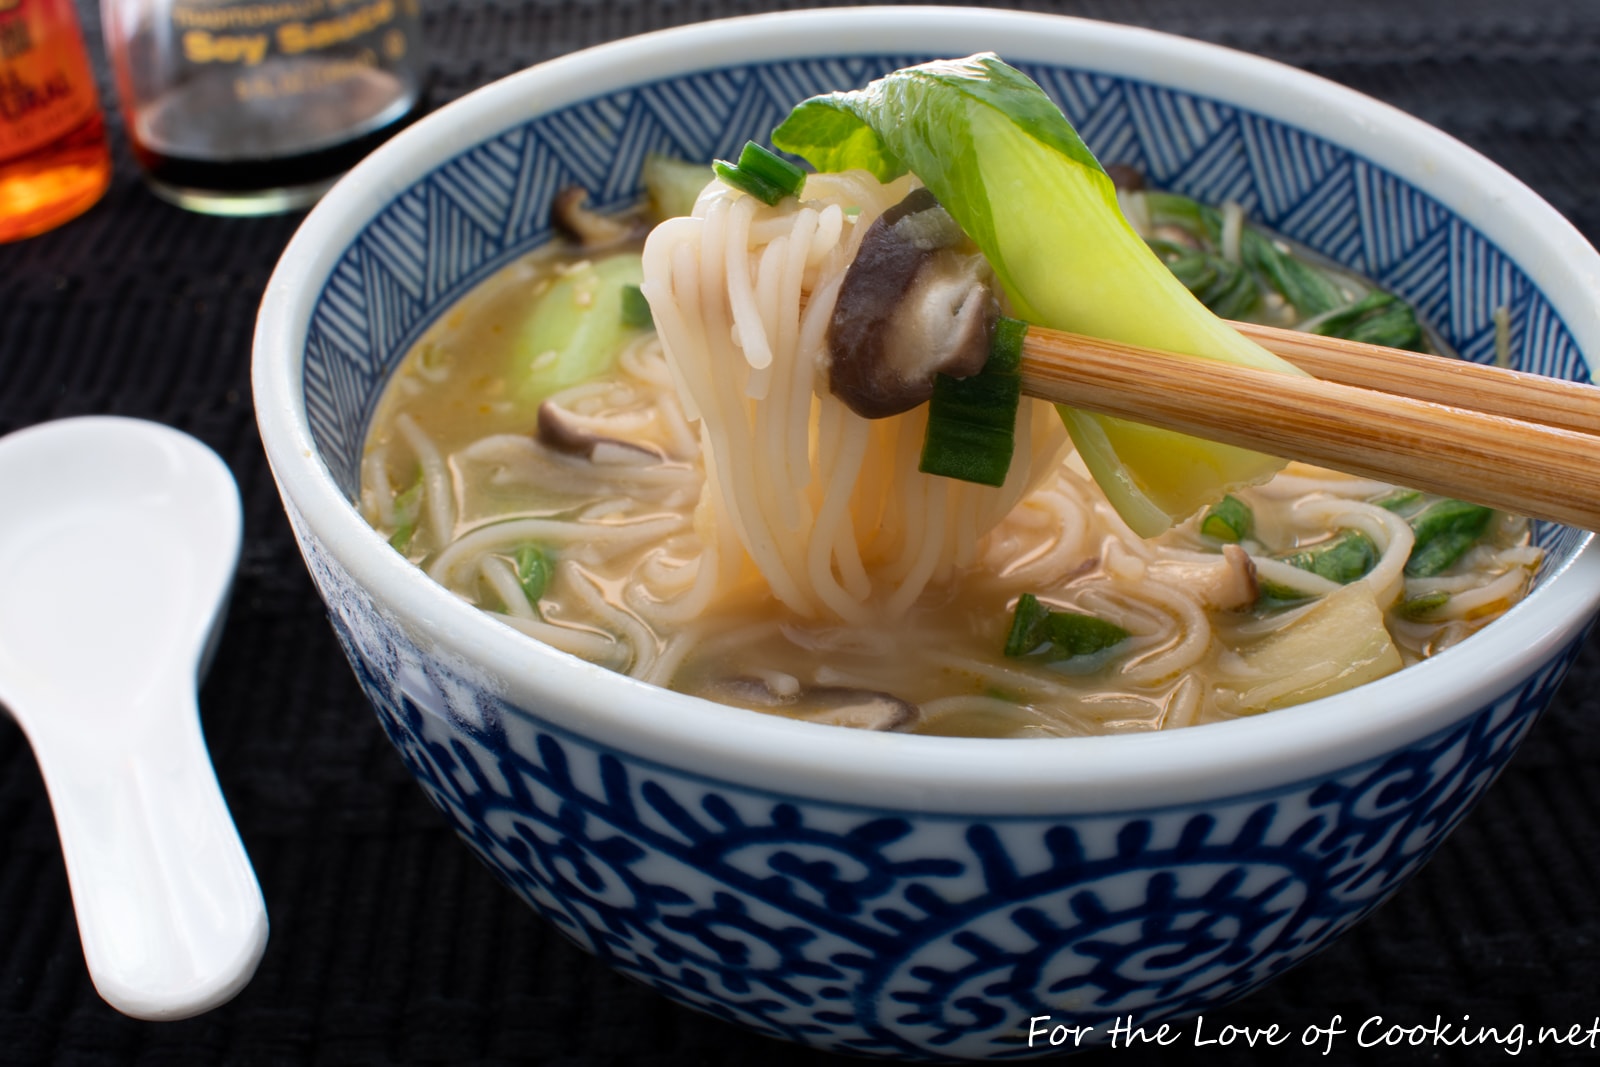 https://fortheloveofcooking-net.exactdn.com/wp-content/uploads/2019/06/Ginger-Garlic-Noodle-Soup-with-Bok-Choy-and-Shiitake-Mushrooms-7734-1.jpg?strip=all&lossy=1&quality=90&w=2560&ssl=1